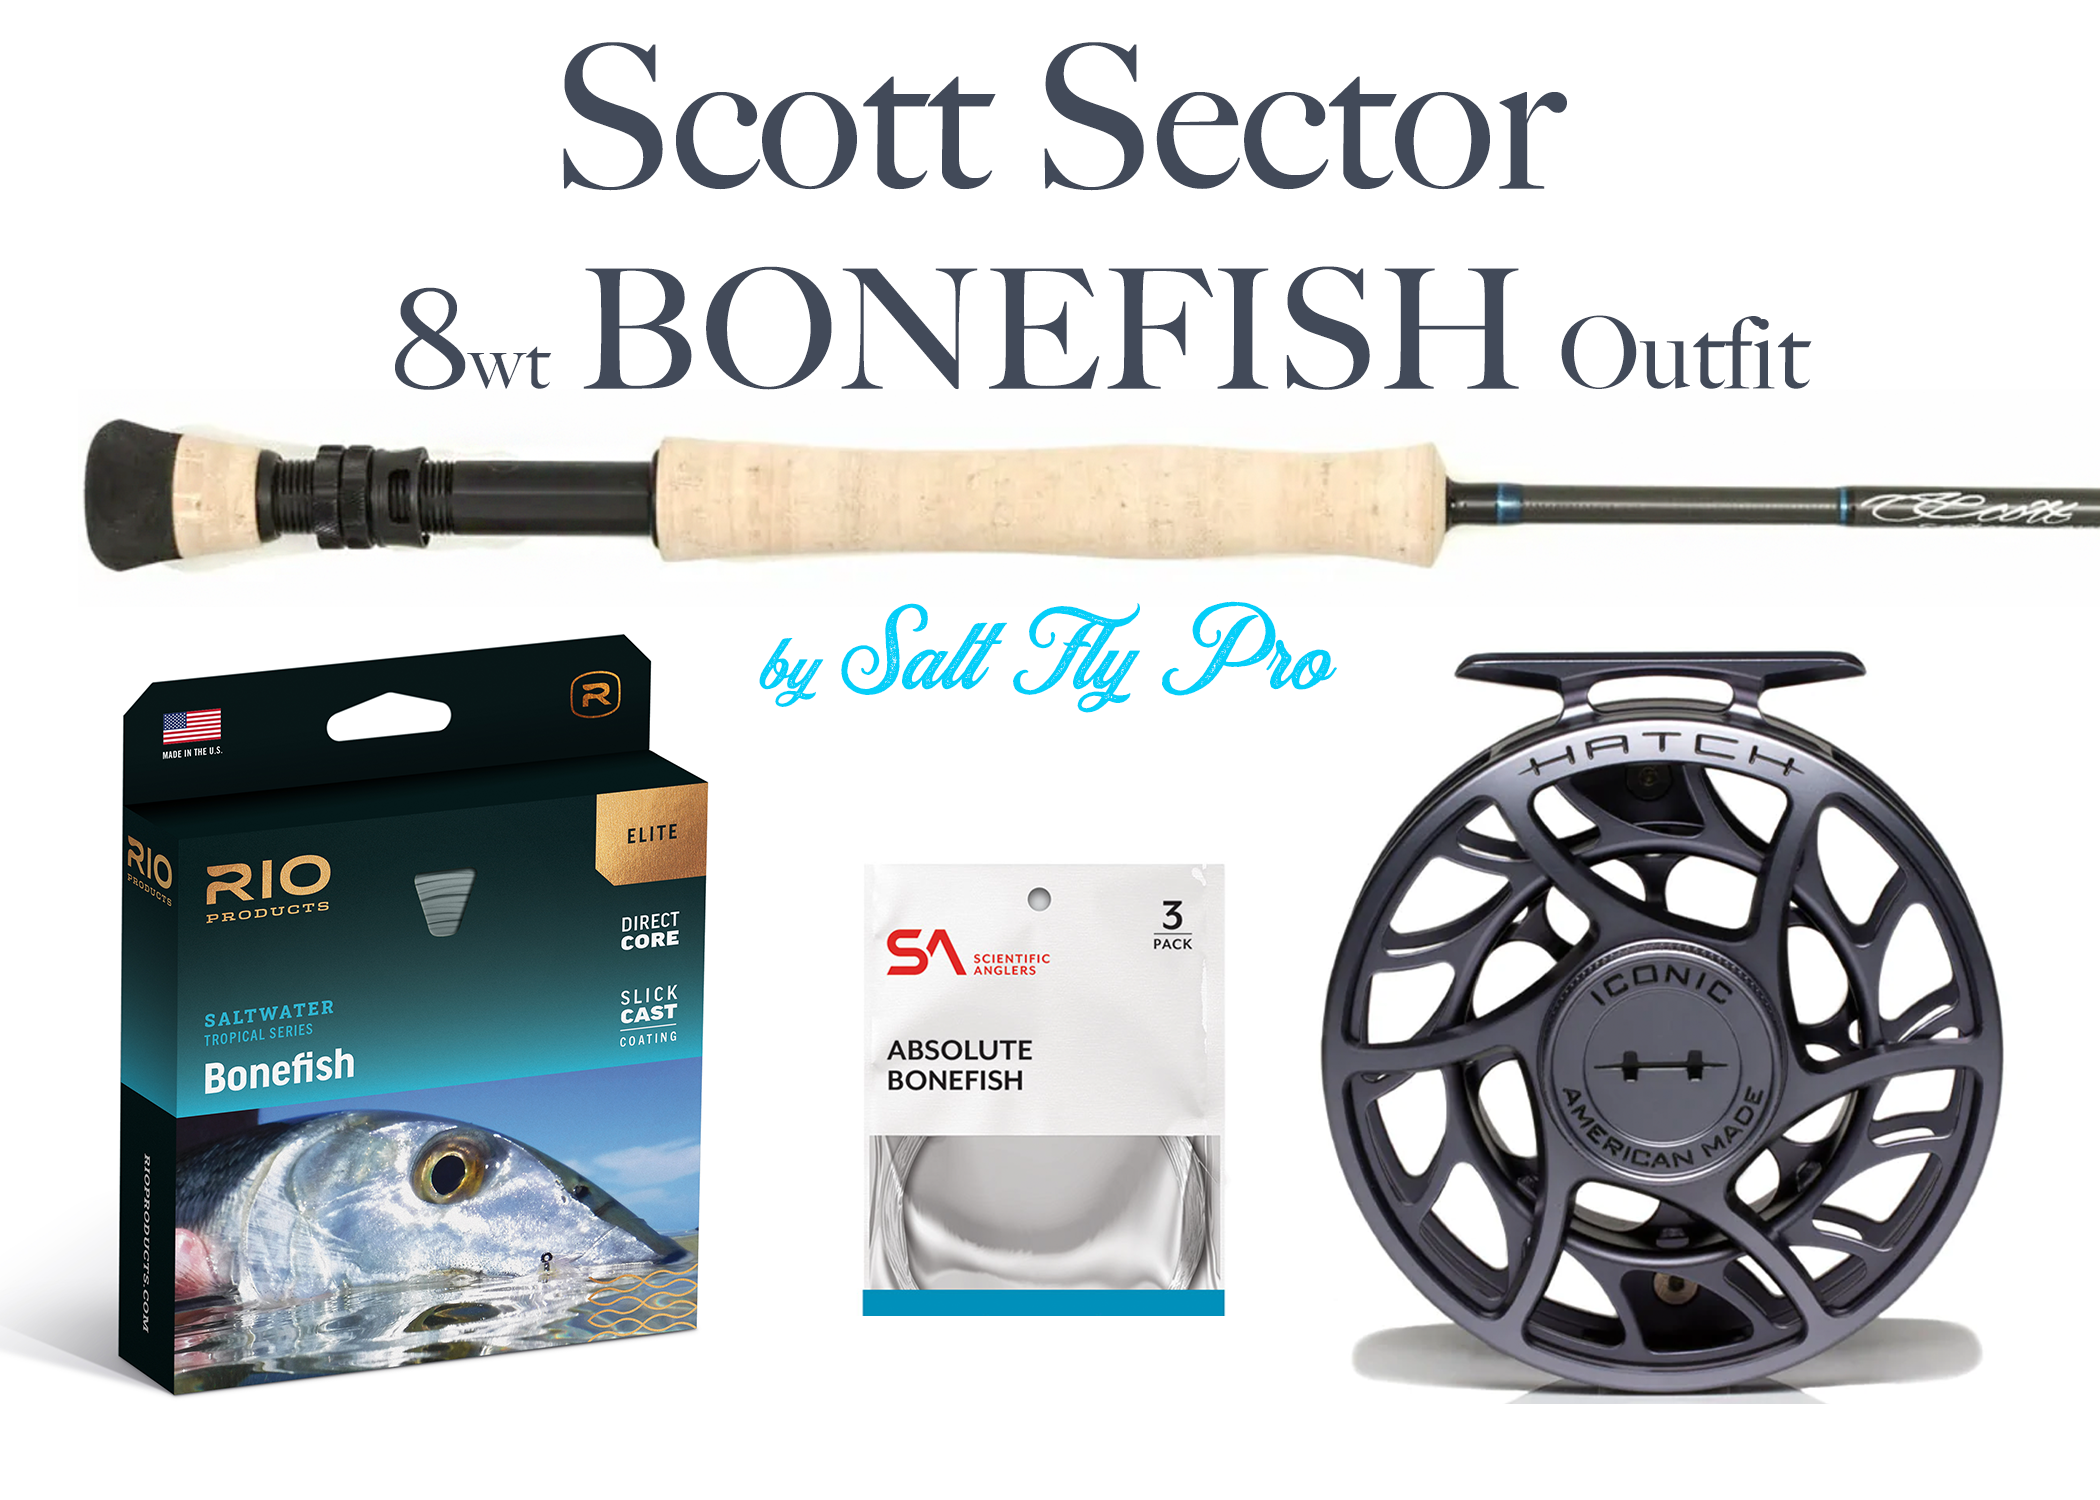 Scott Sector 8wt BONEFISH Outfit Combo - NEW!